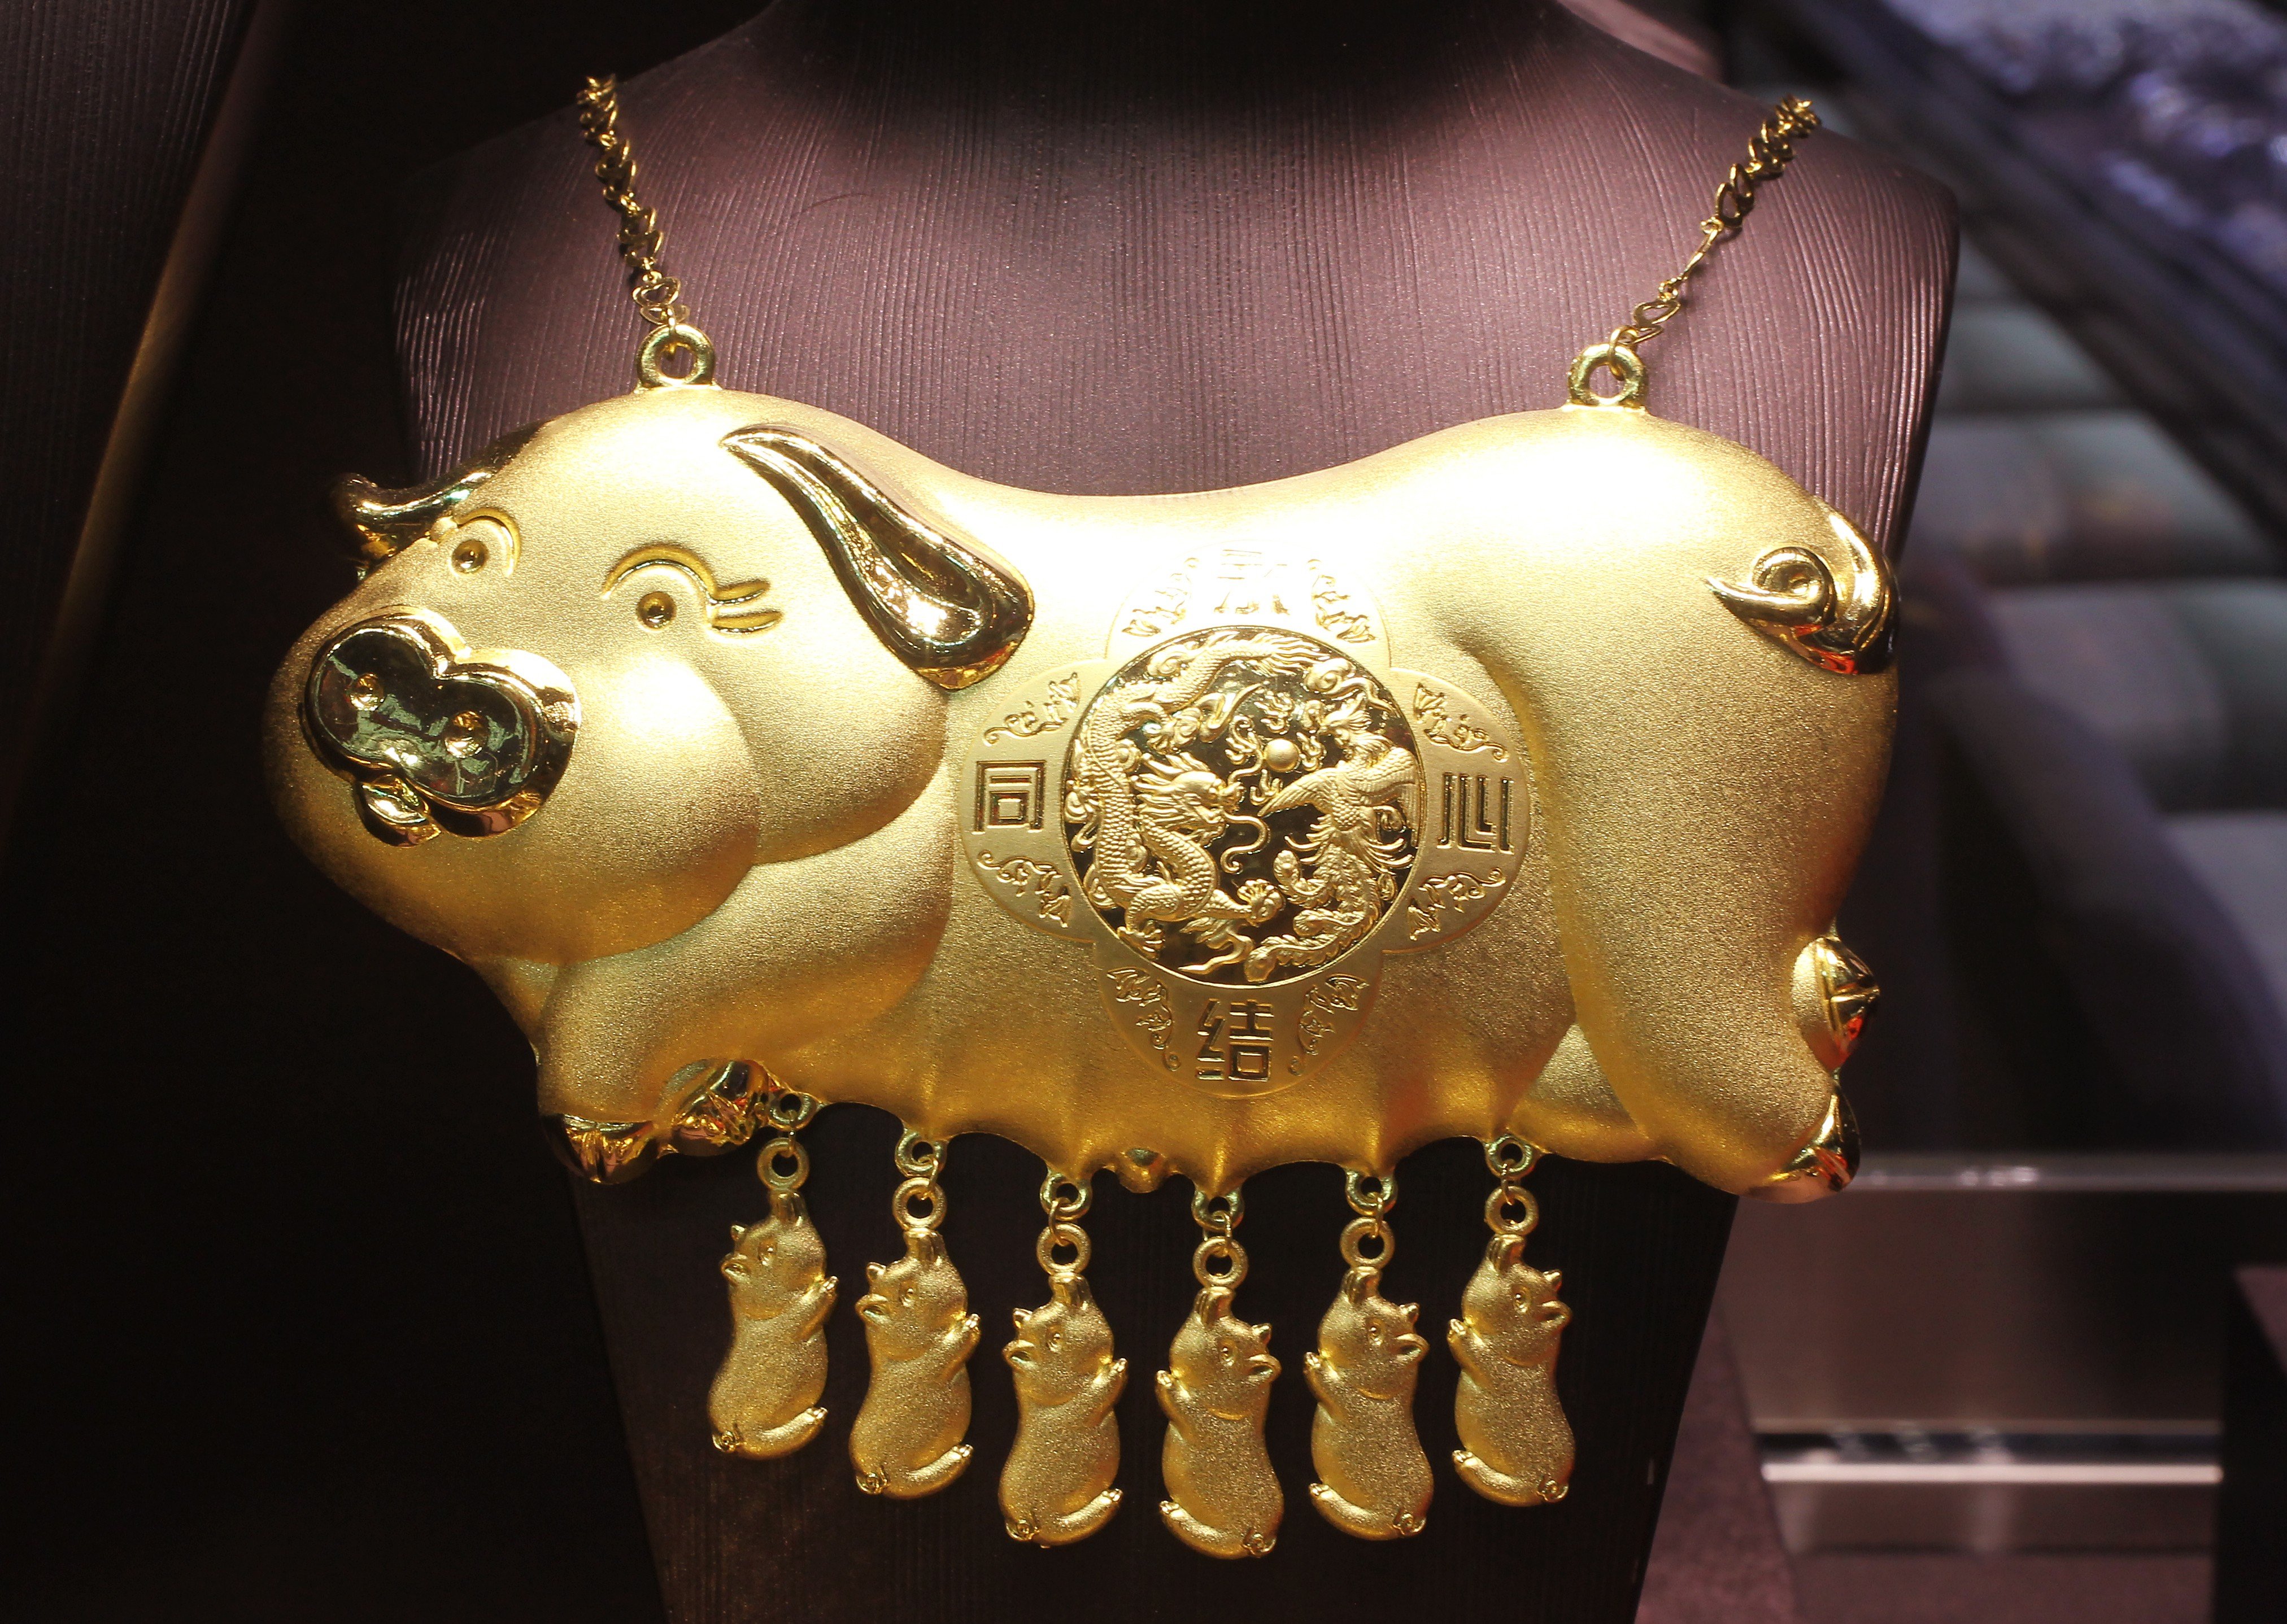 Steeped in tradition, cumbersome pig necklaces continue to be hugely popular with Chinese brides who like to pair it with traditional dresses at their nuptials – such as this gold pig necklace displayed in a gold shop in Mong Kok, Hong Kong. Photo: Edward Wong